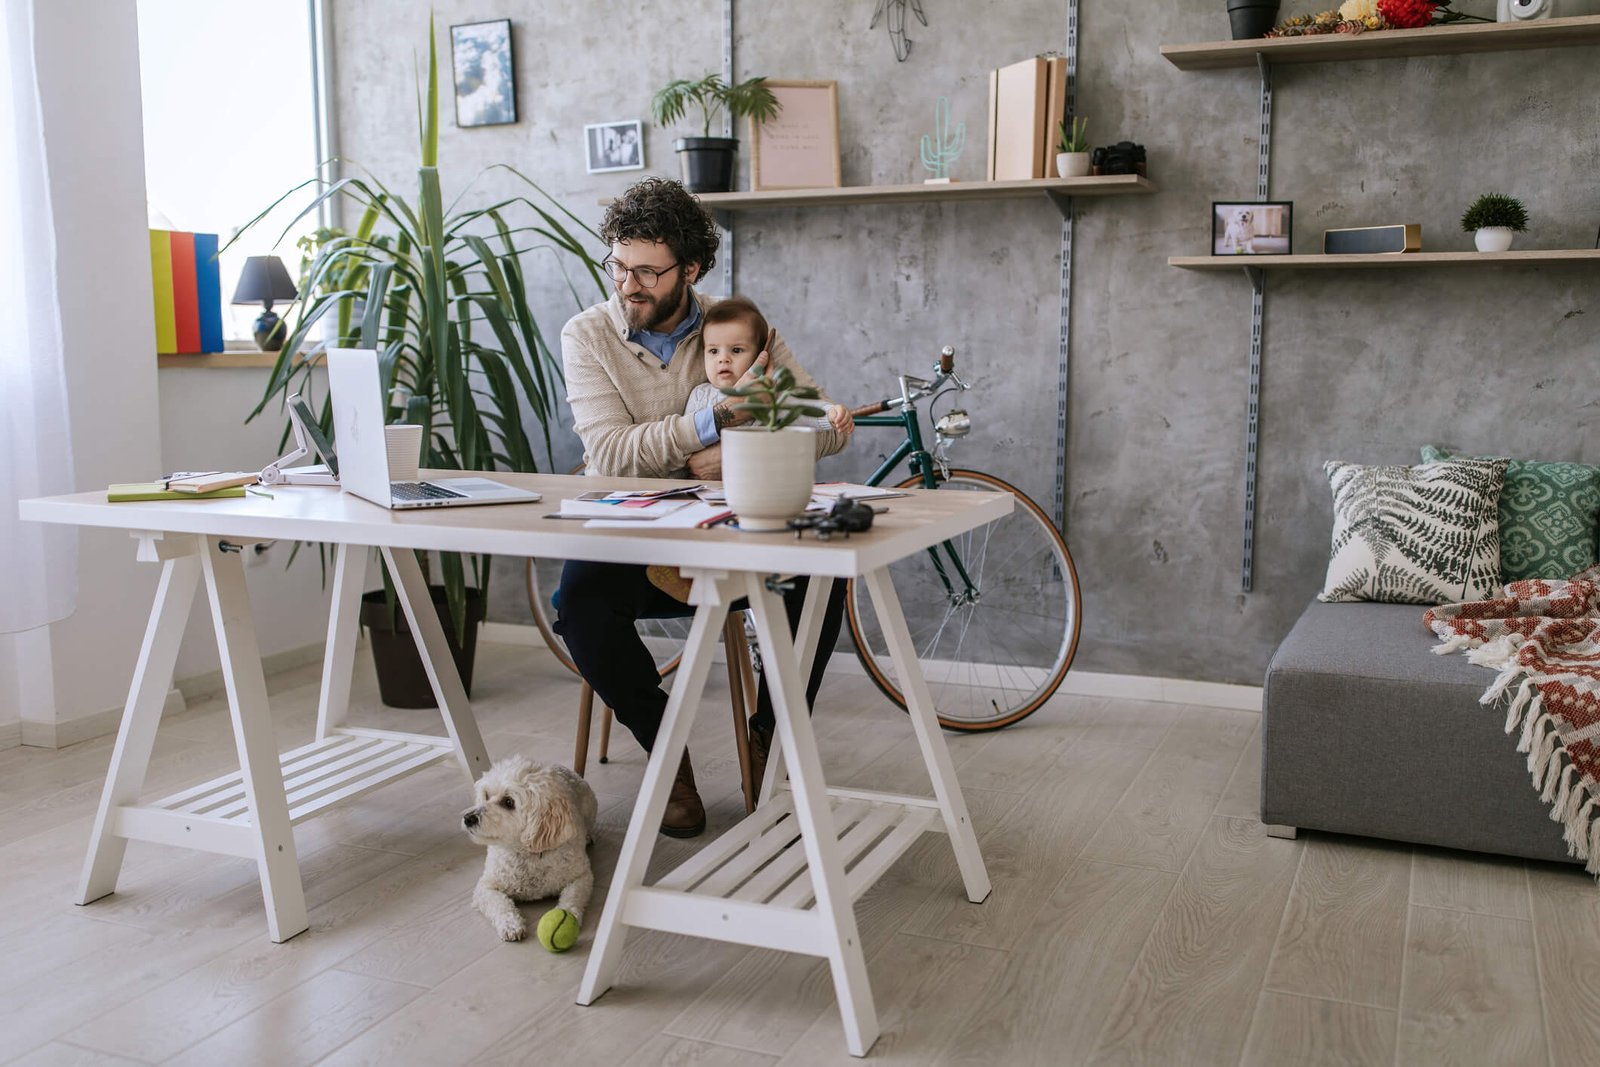 How to Keep Employees Engaged in a Remote Working Environment